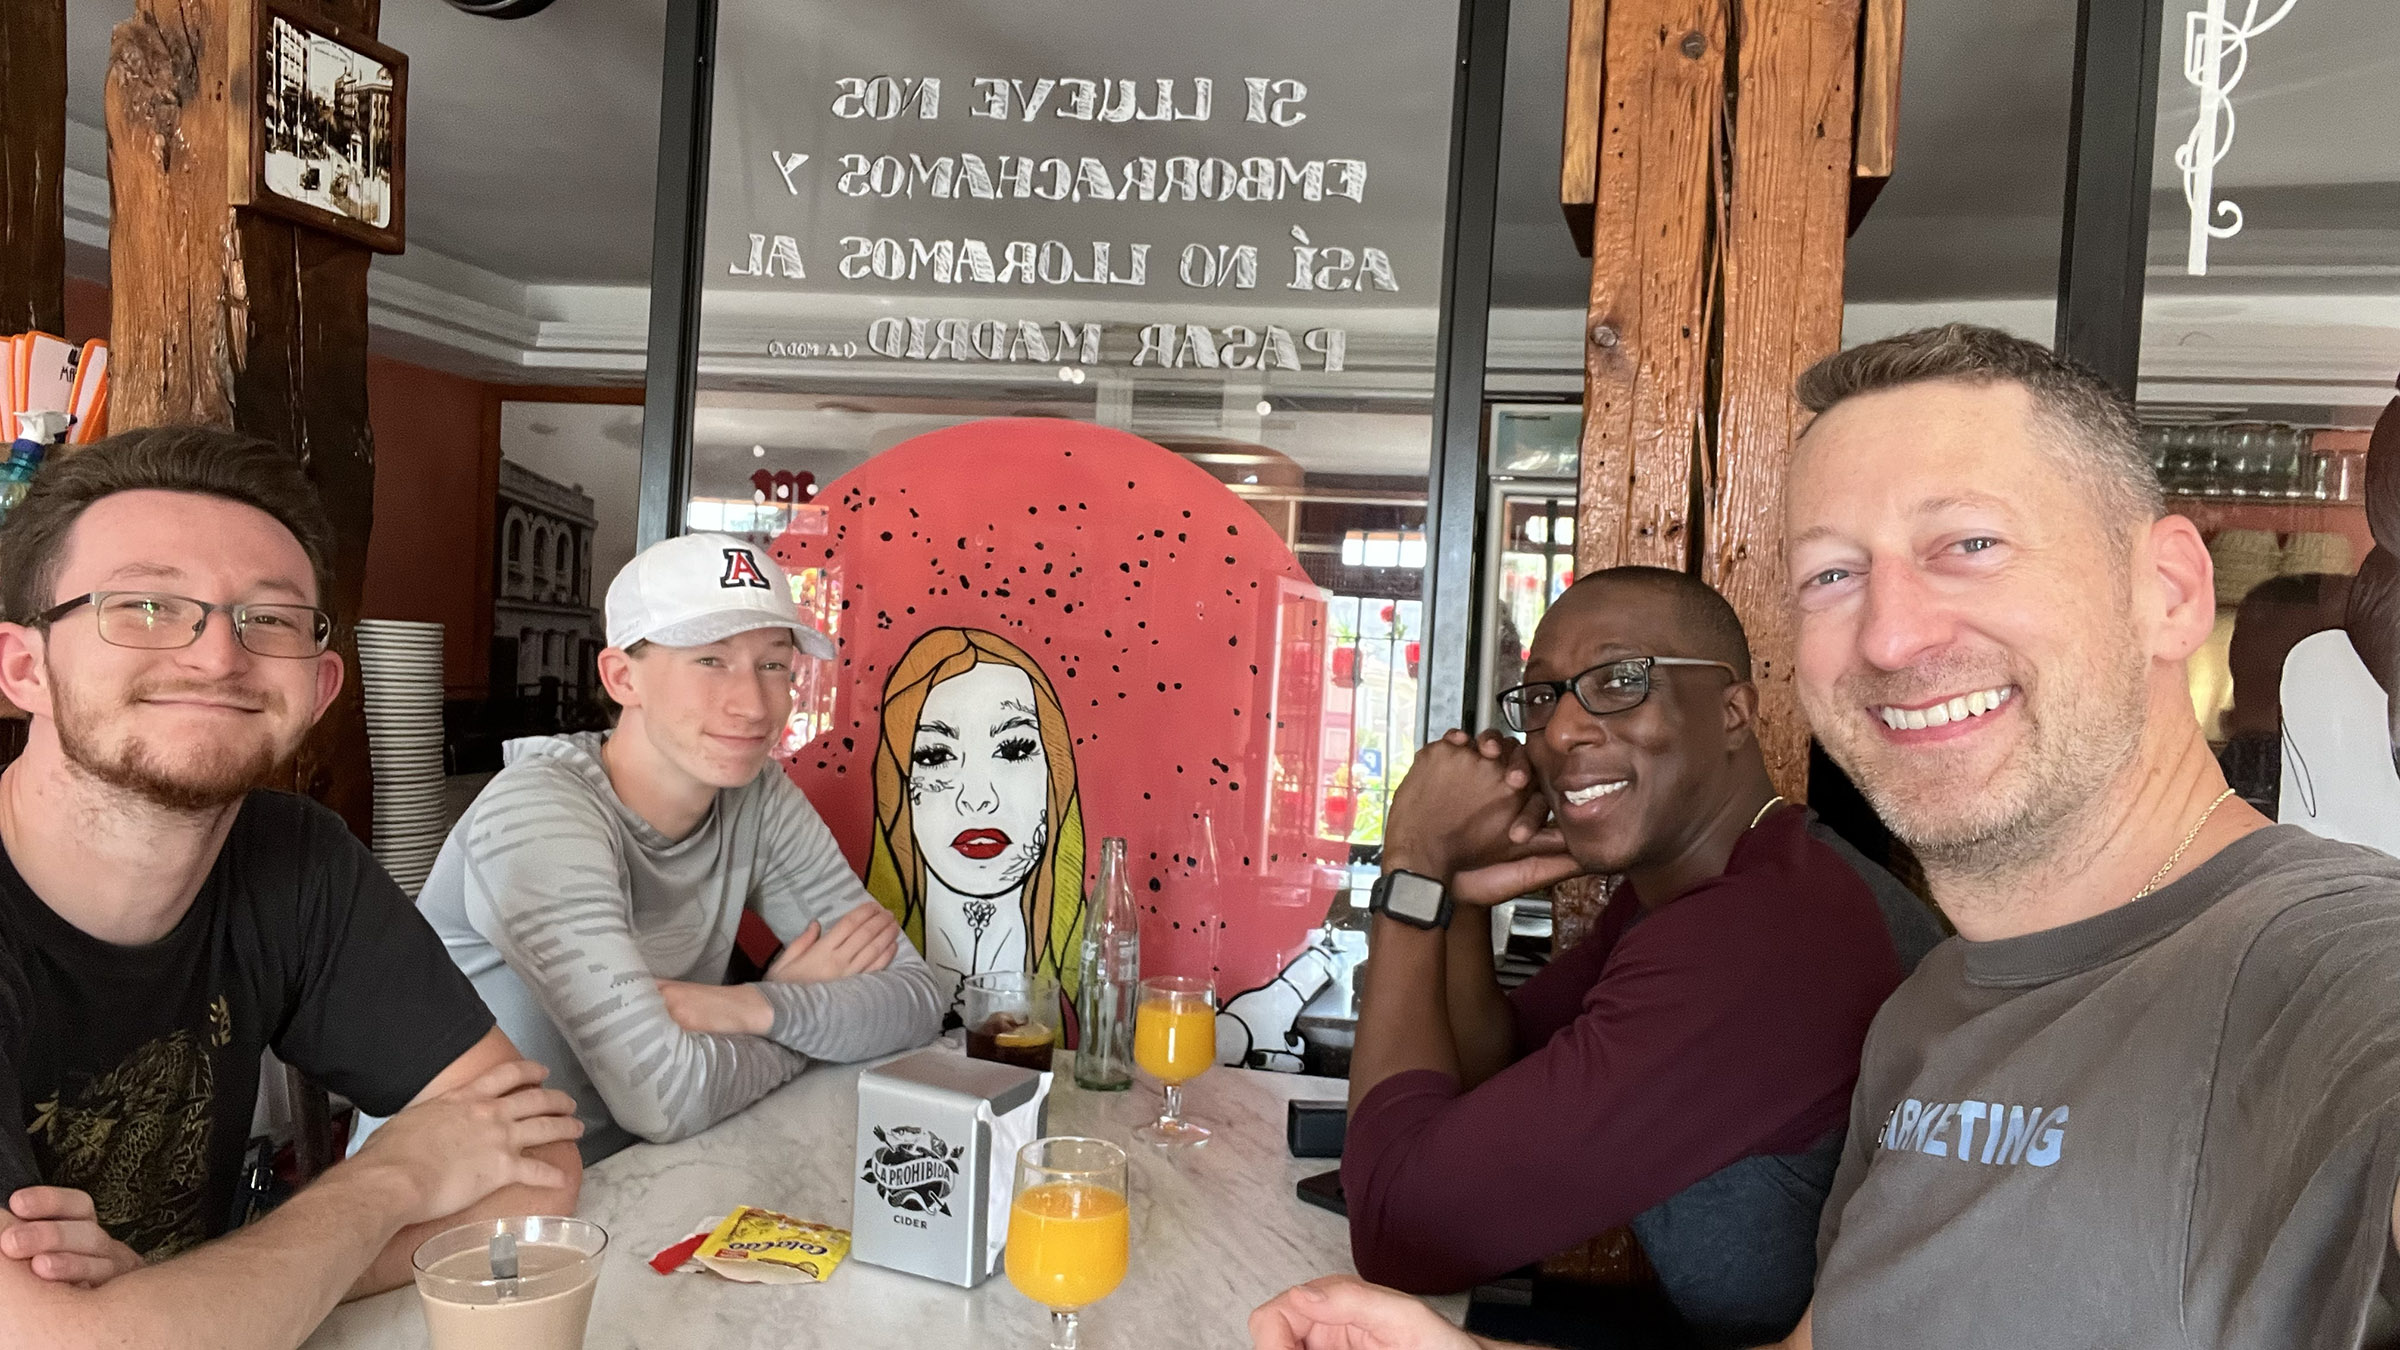 Paul J. Heney and his family eating breakfast in Madrid (Photo Credit: Paul J. Heney)